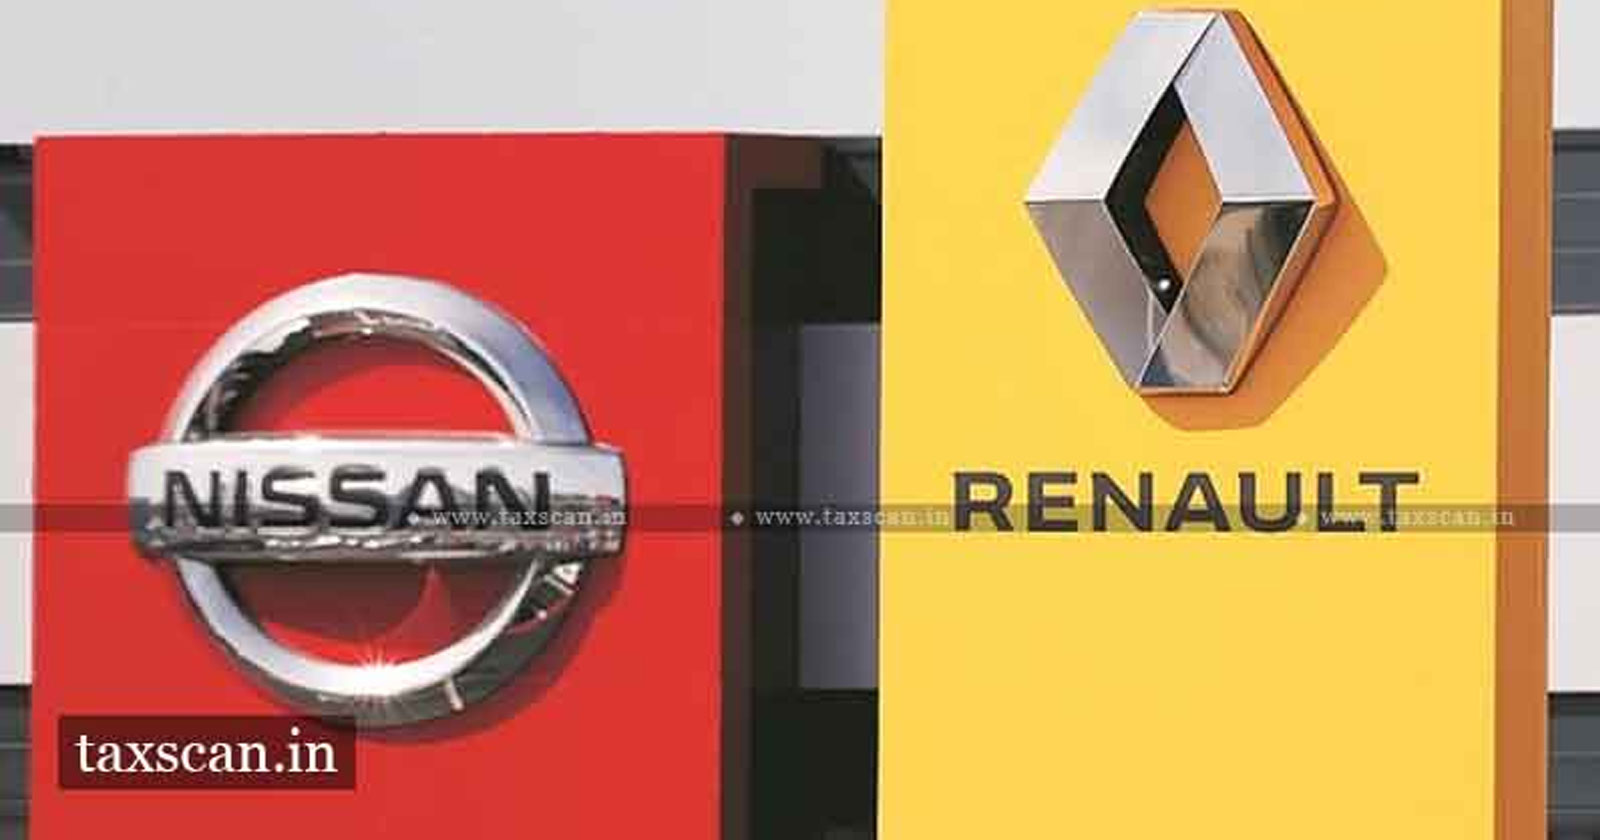 Relief - Renault Nissan - Madras HC - Revision Order - TNGST Act - taxscan